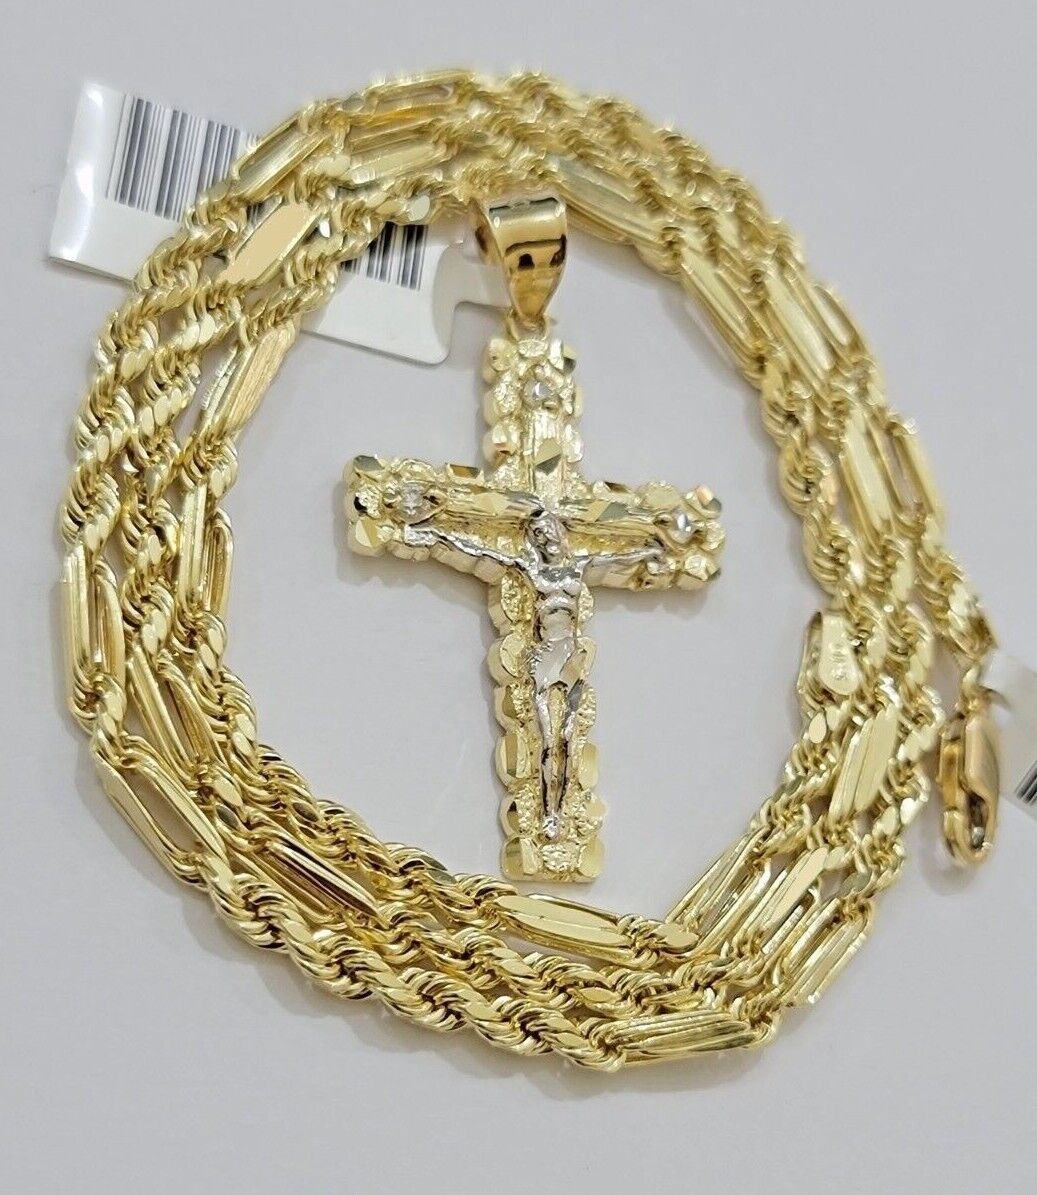 10kt Gold Milano Rope Chain Cross Charm Pendant Set 18-24 Inch 3mm Necklace REAL